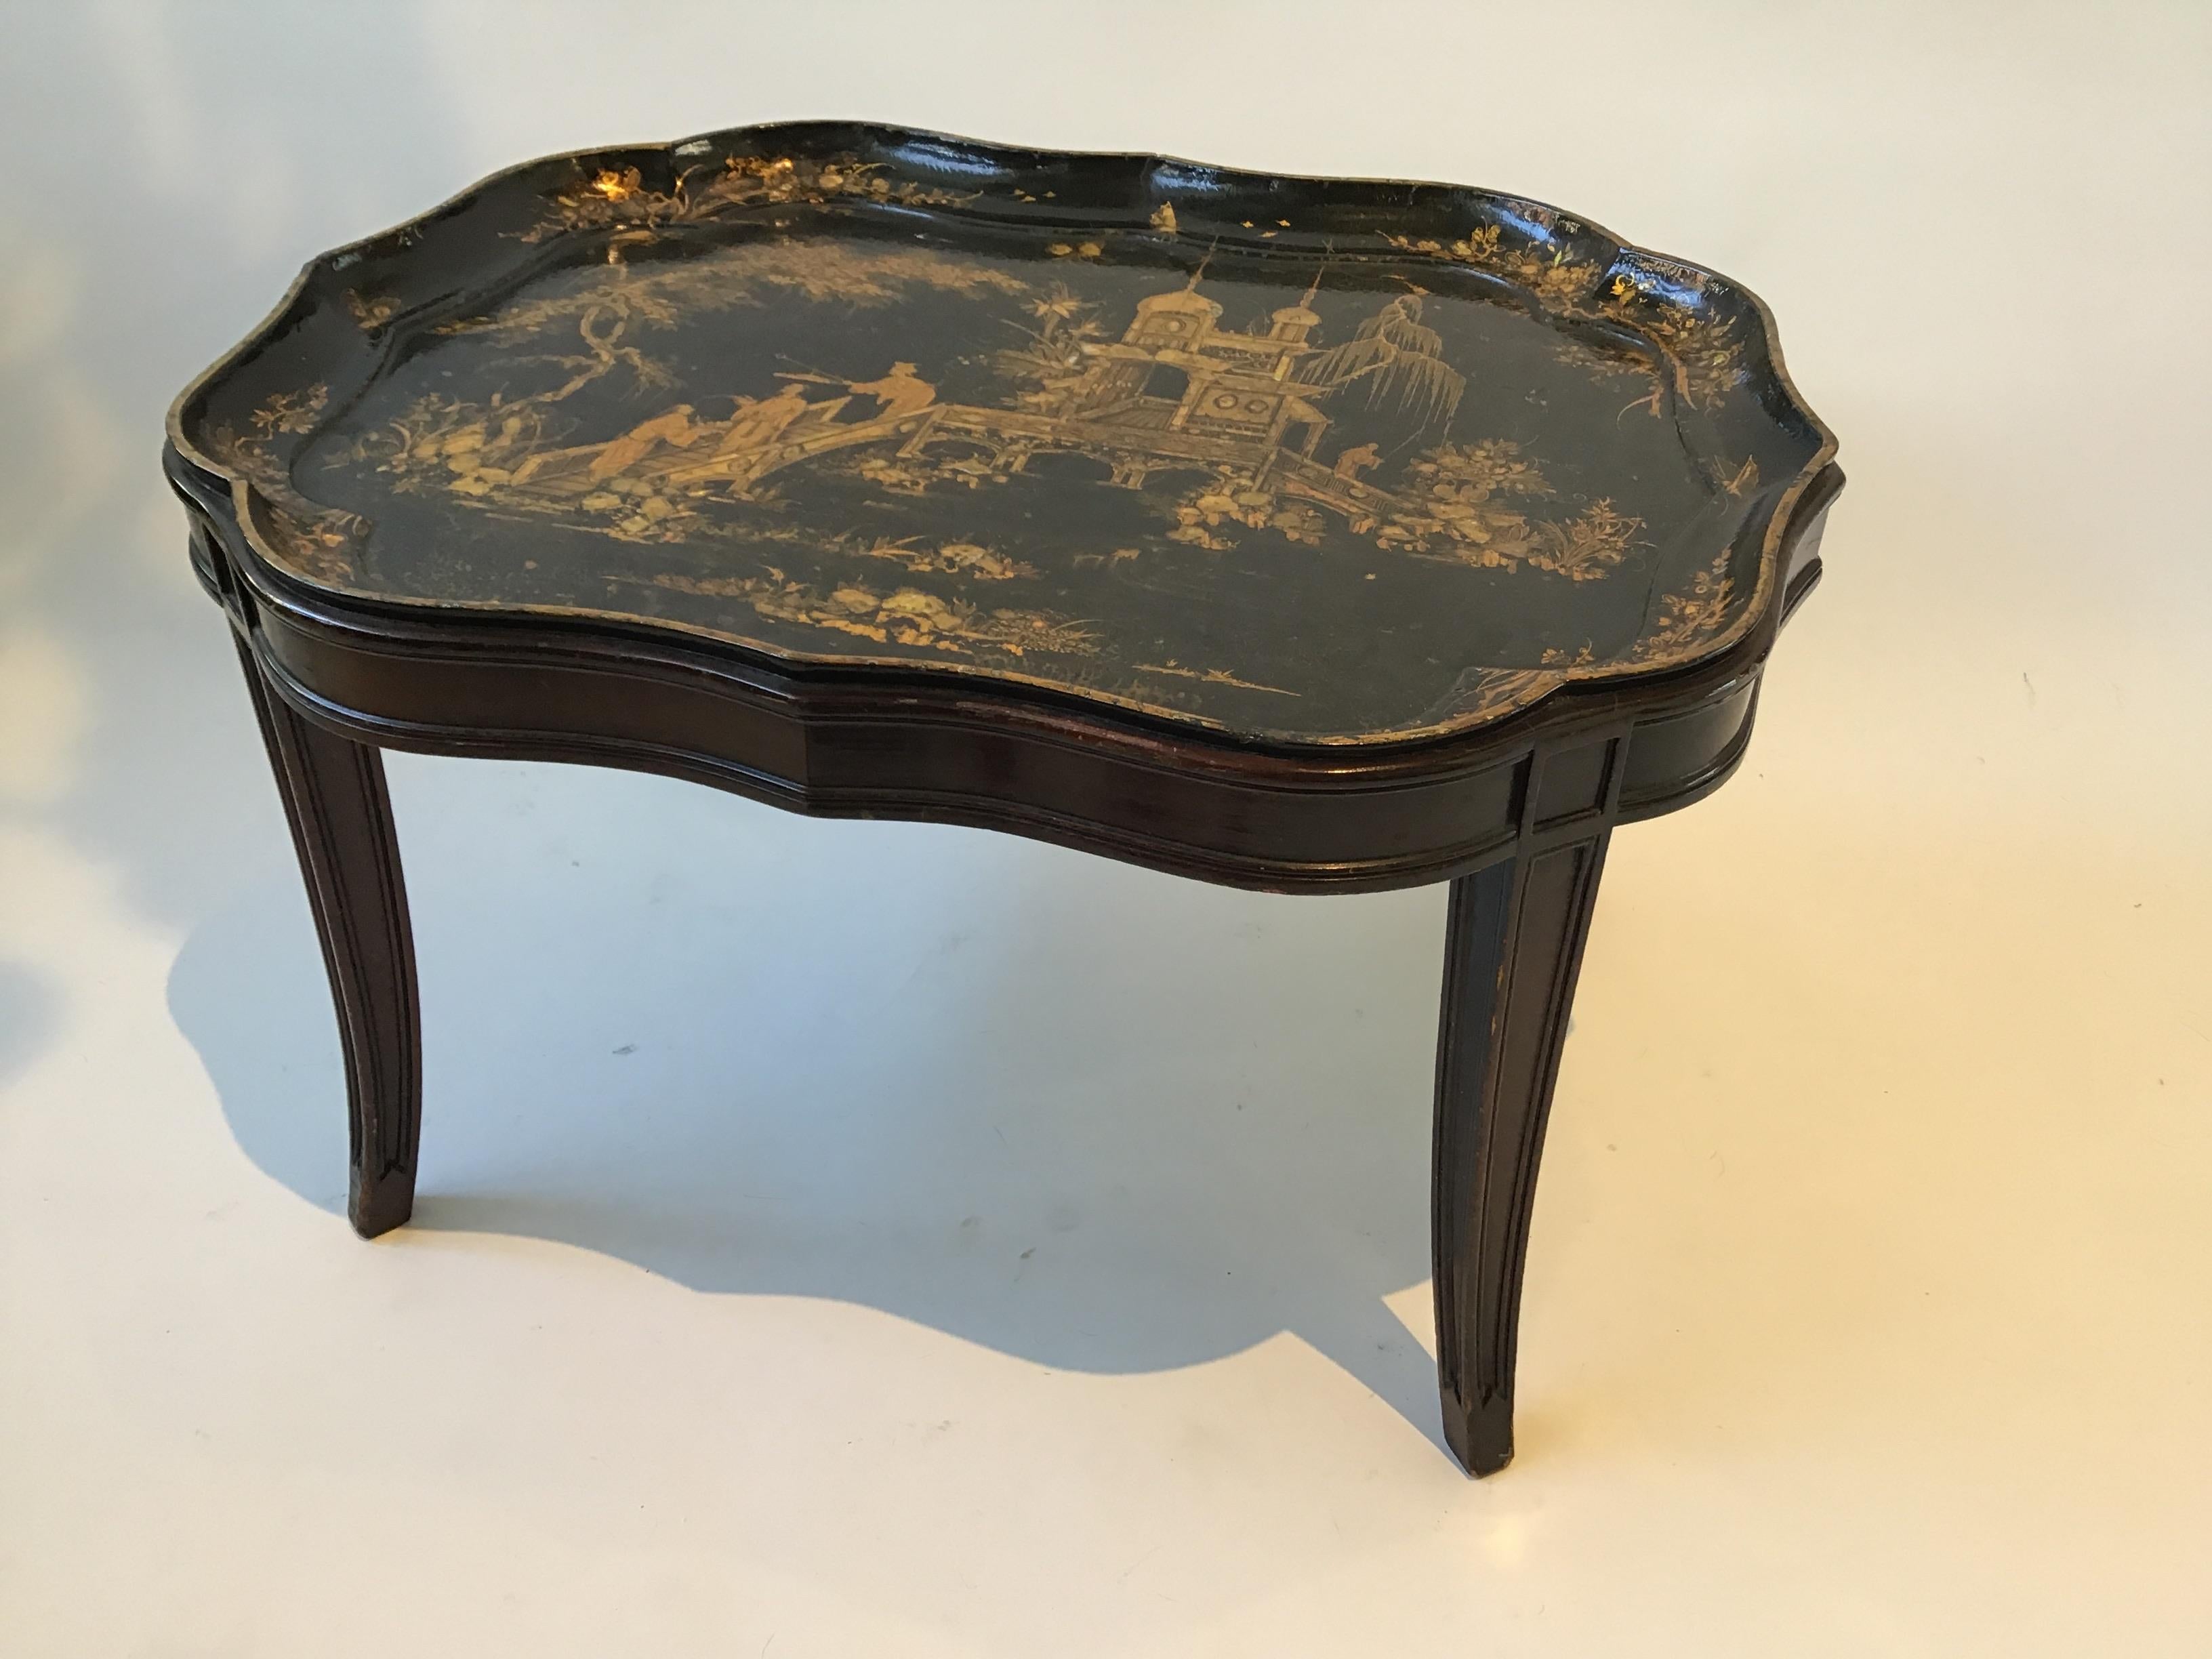 1880s English chinoiserie paper mache tray table. Hand painted tray with mother of Pearl on a custom made base. Looks like base was made in the 1940s. 
Some chips in the lacquer finish. There’s a ring on the tray as seen in image 4.